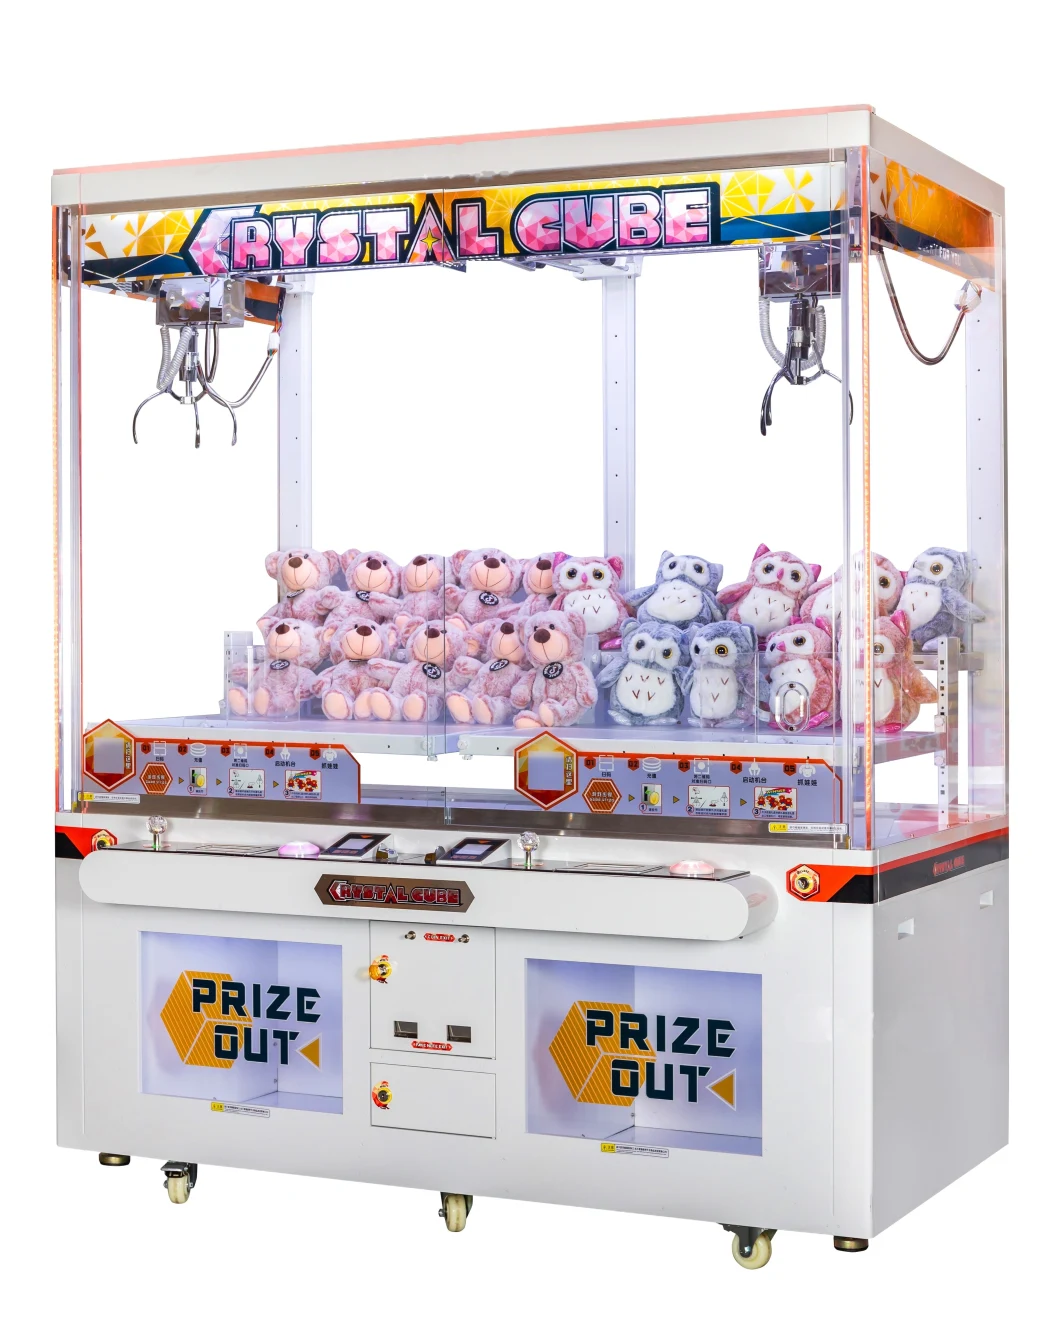 Crystal Love/Toy Vending/Vending/Amusement/Arcade/Game /Claw Machine/Game Player/Arcade Game Machines/Video Game/Amusement Machine/Arcade Machine/Game Machine